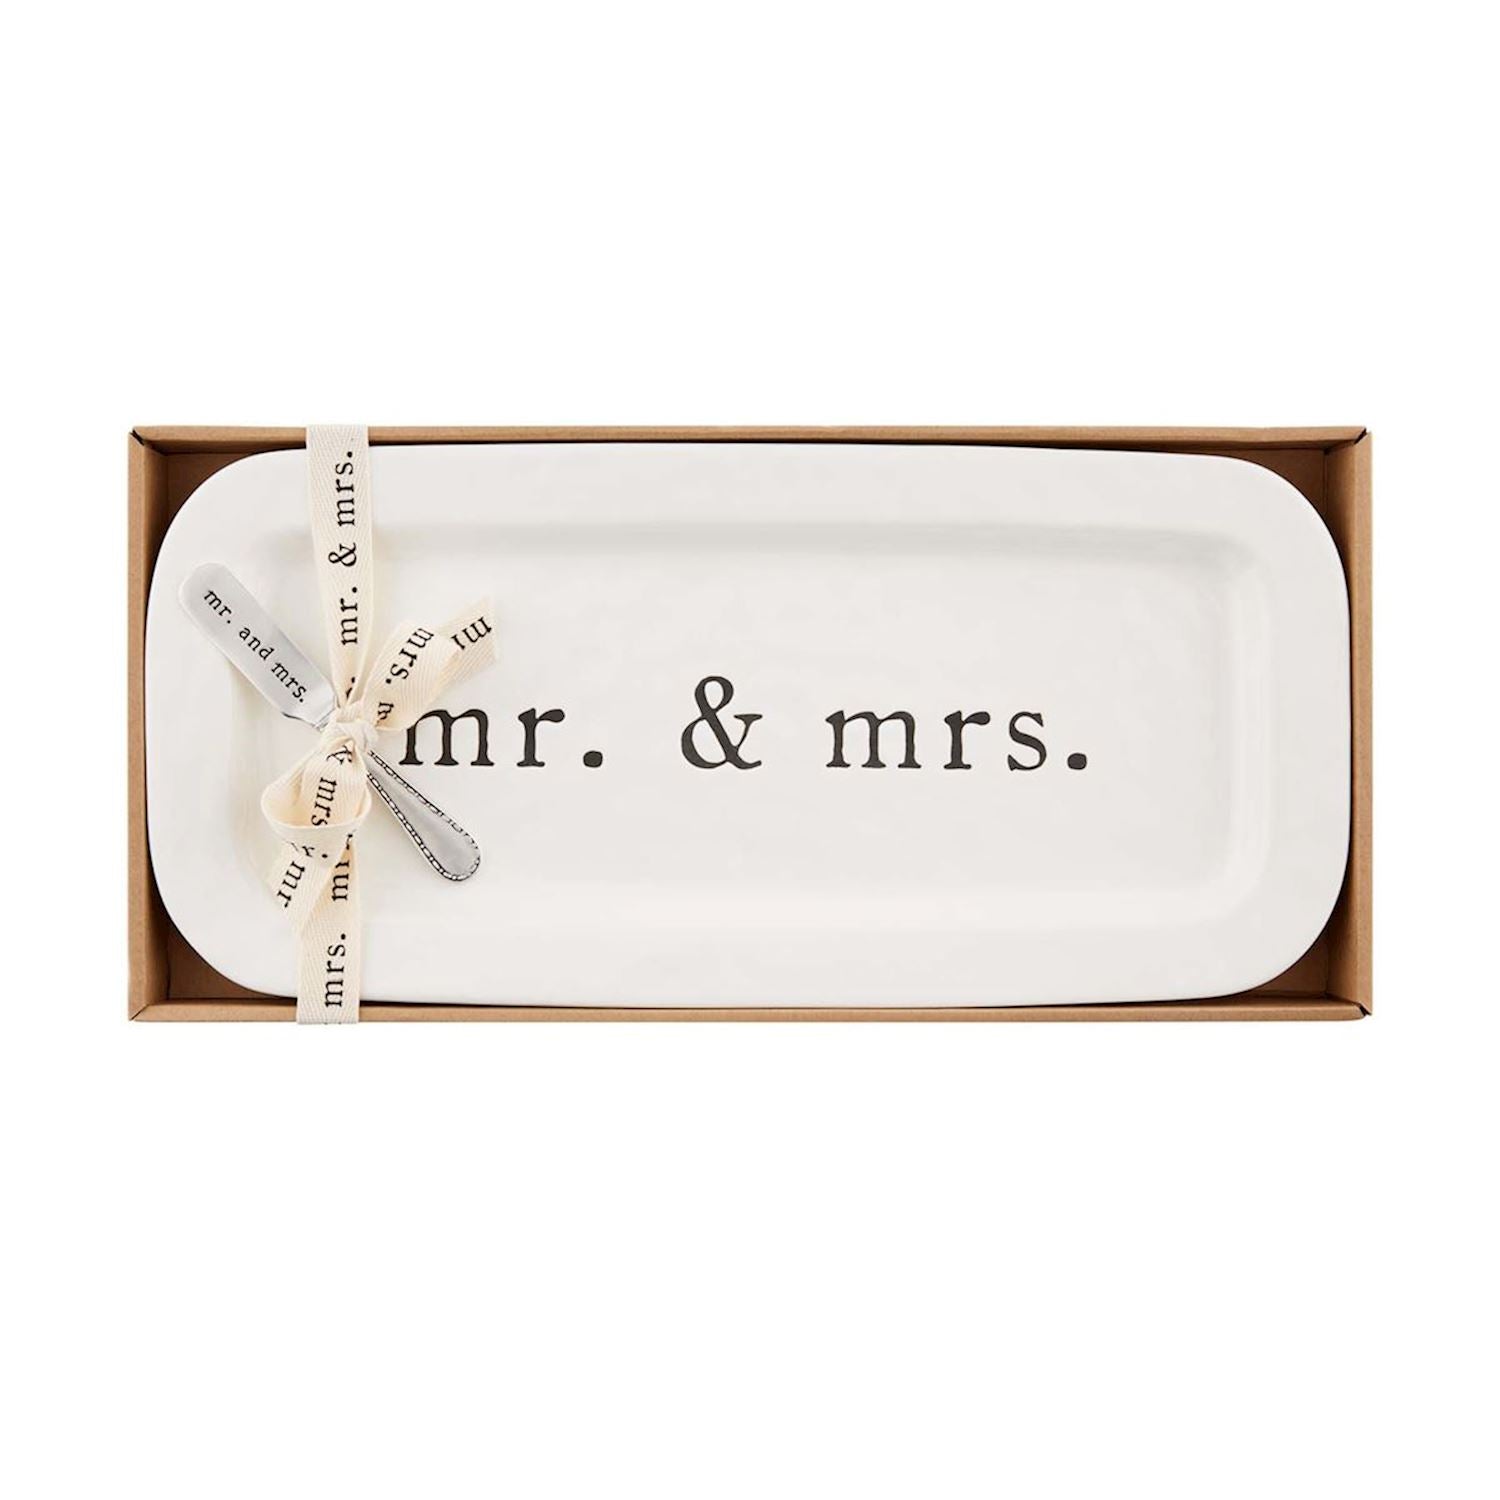 Mud Pie Mr. and Mrs. Hostess Set-Home Decor & Gifts-Deadwood South Boutique & Company-Deadwood South Boutique, Women's Fashion Boutique in Henderson, TX